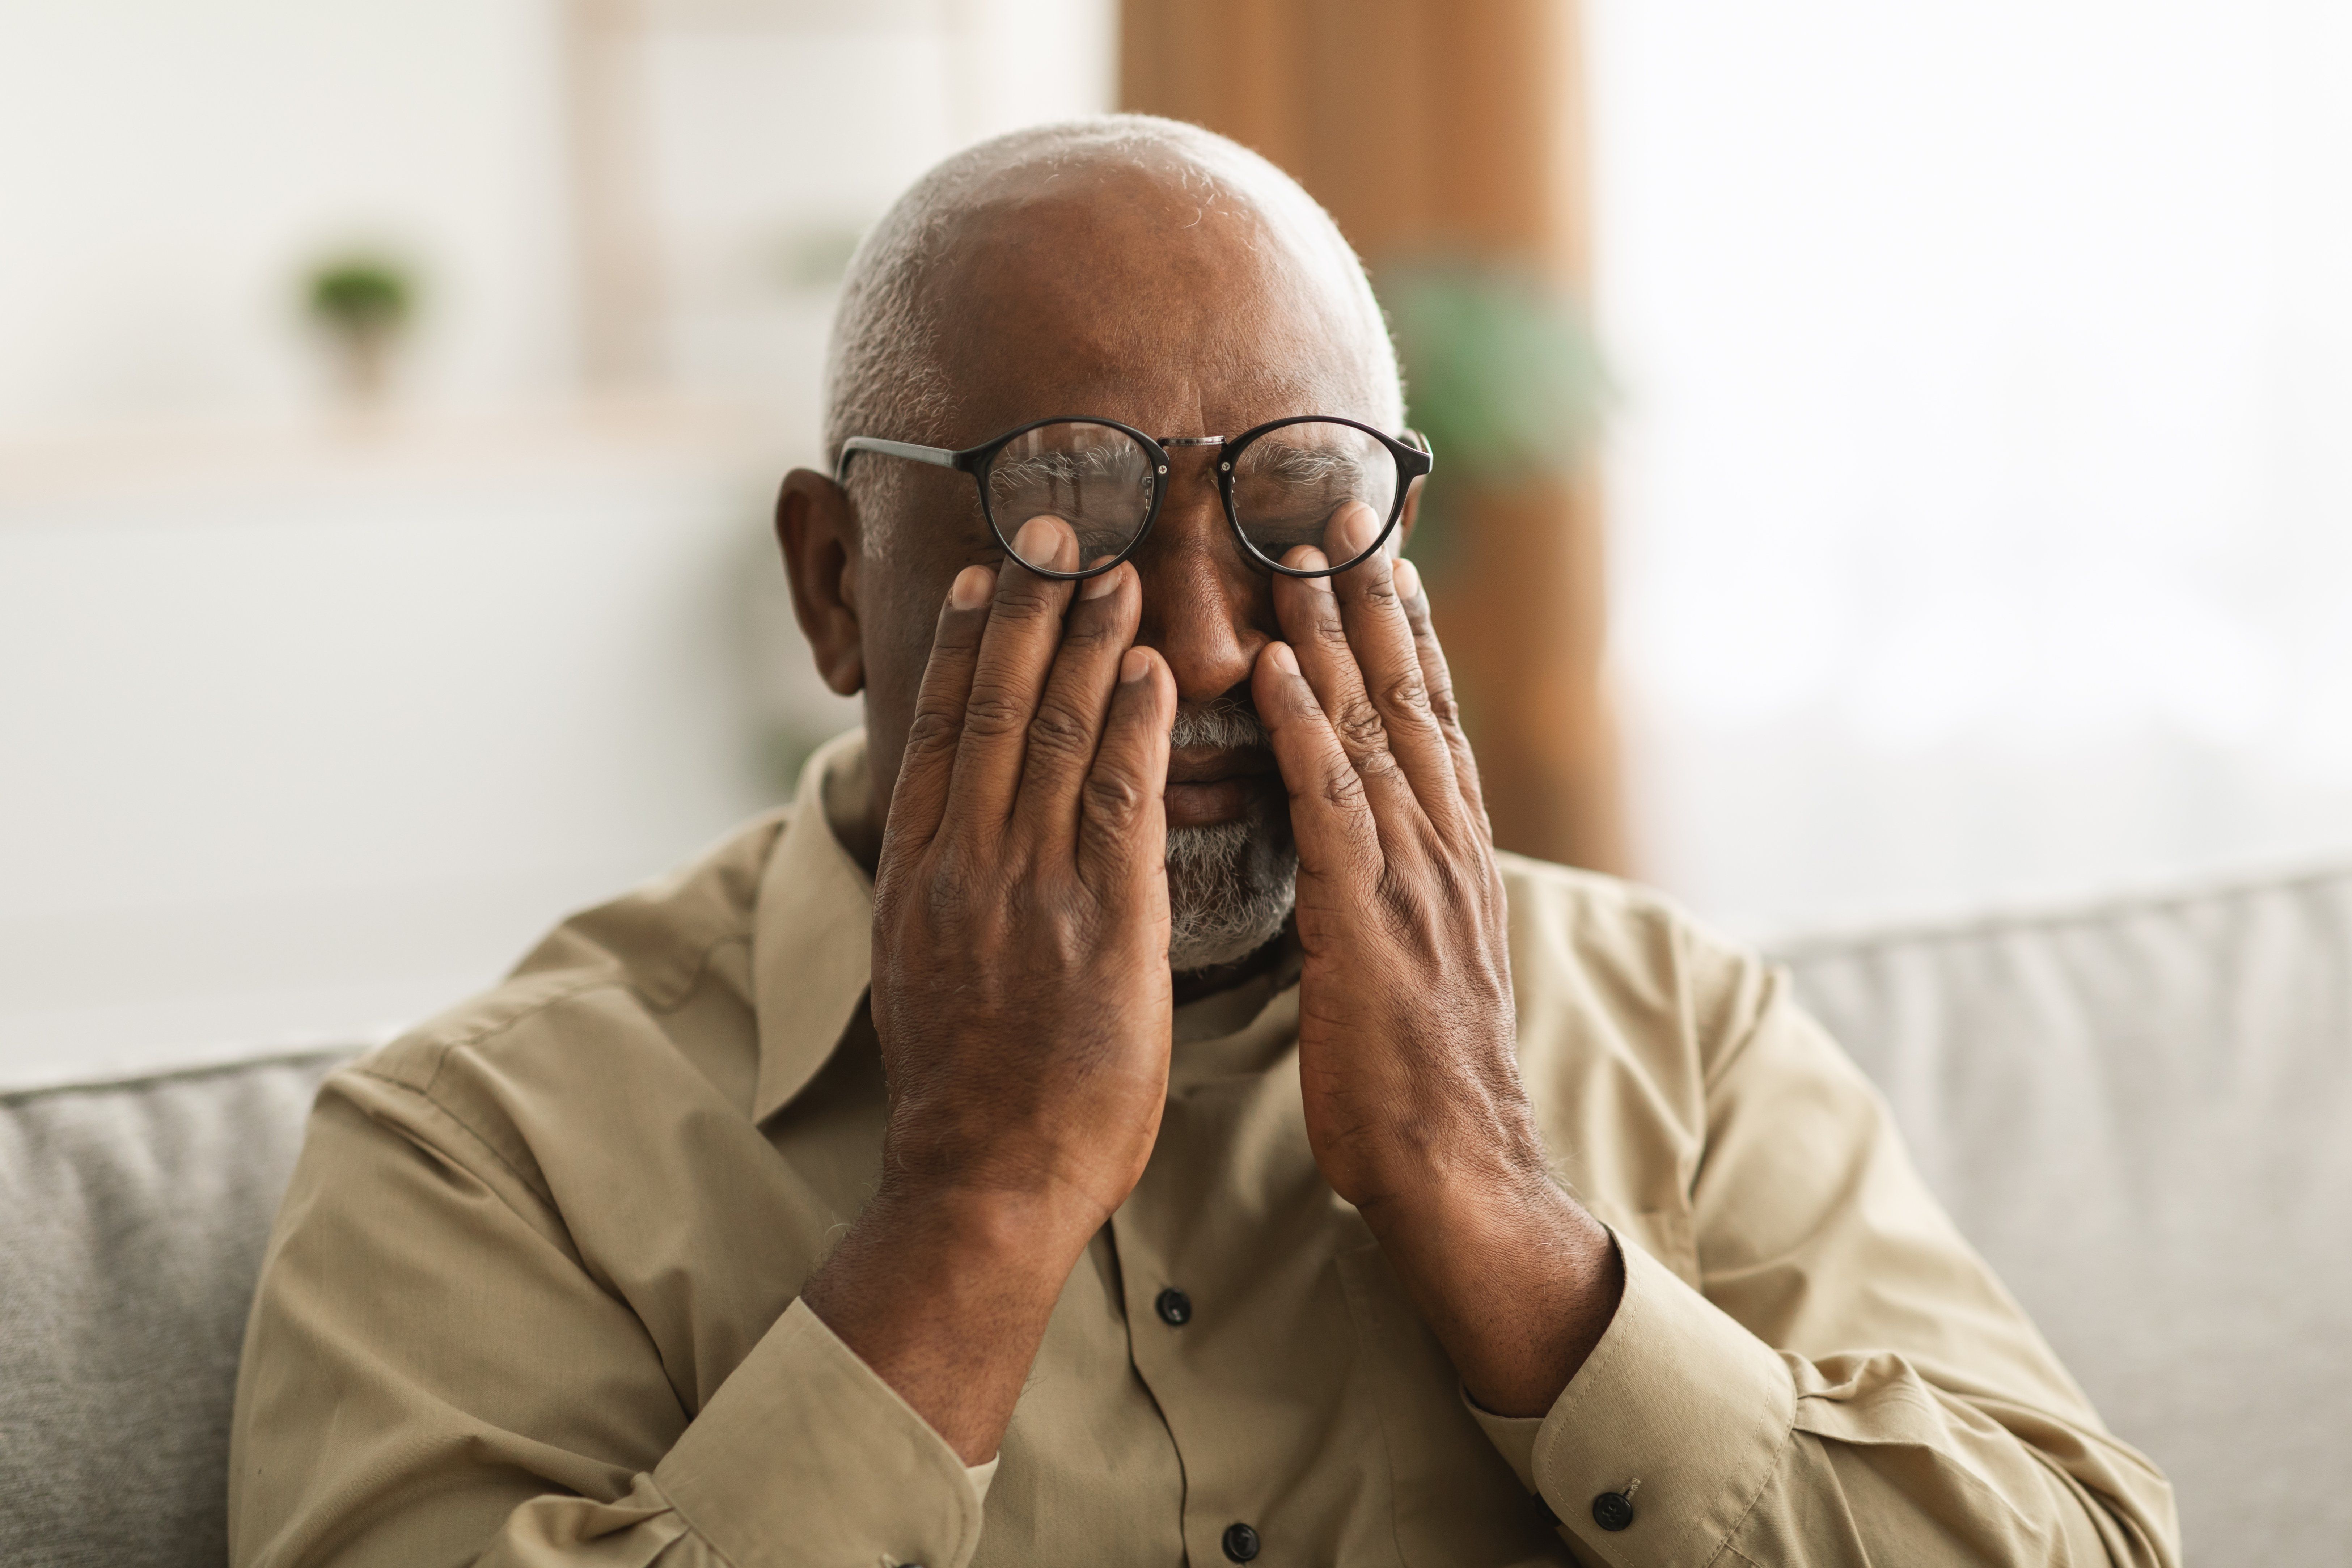 How Do You Get Diagnosed or Tested for Glaucoma?